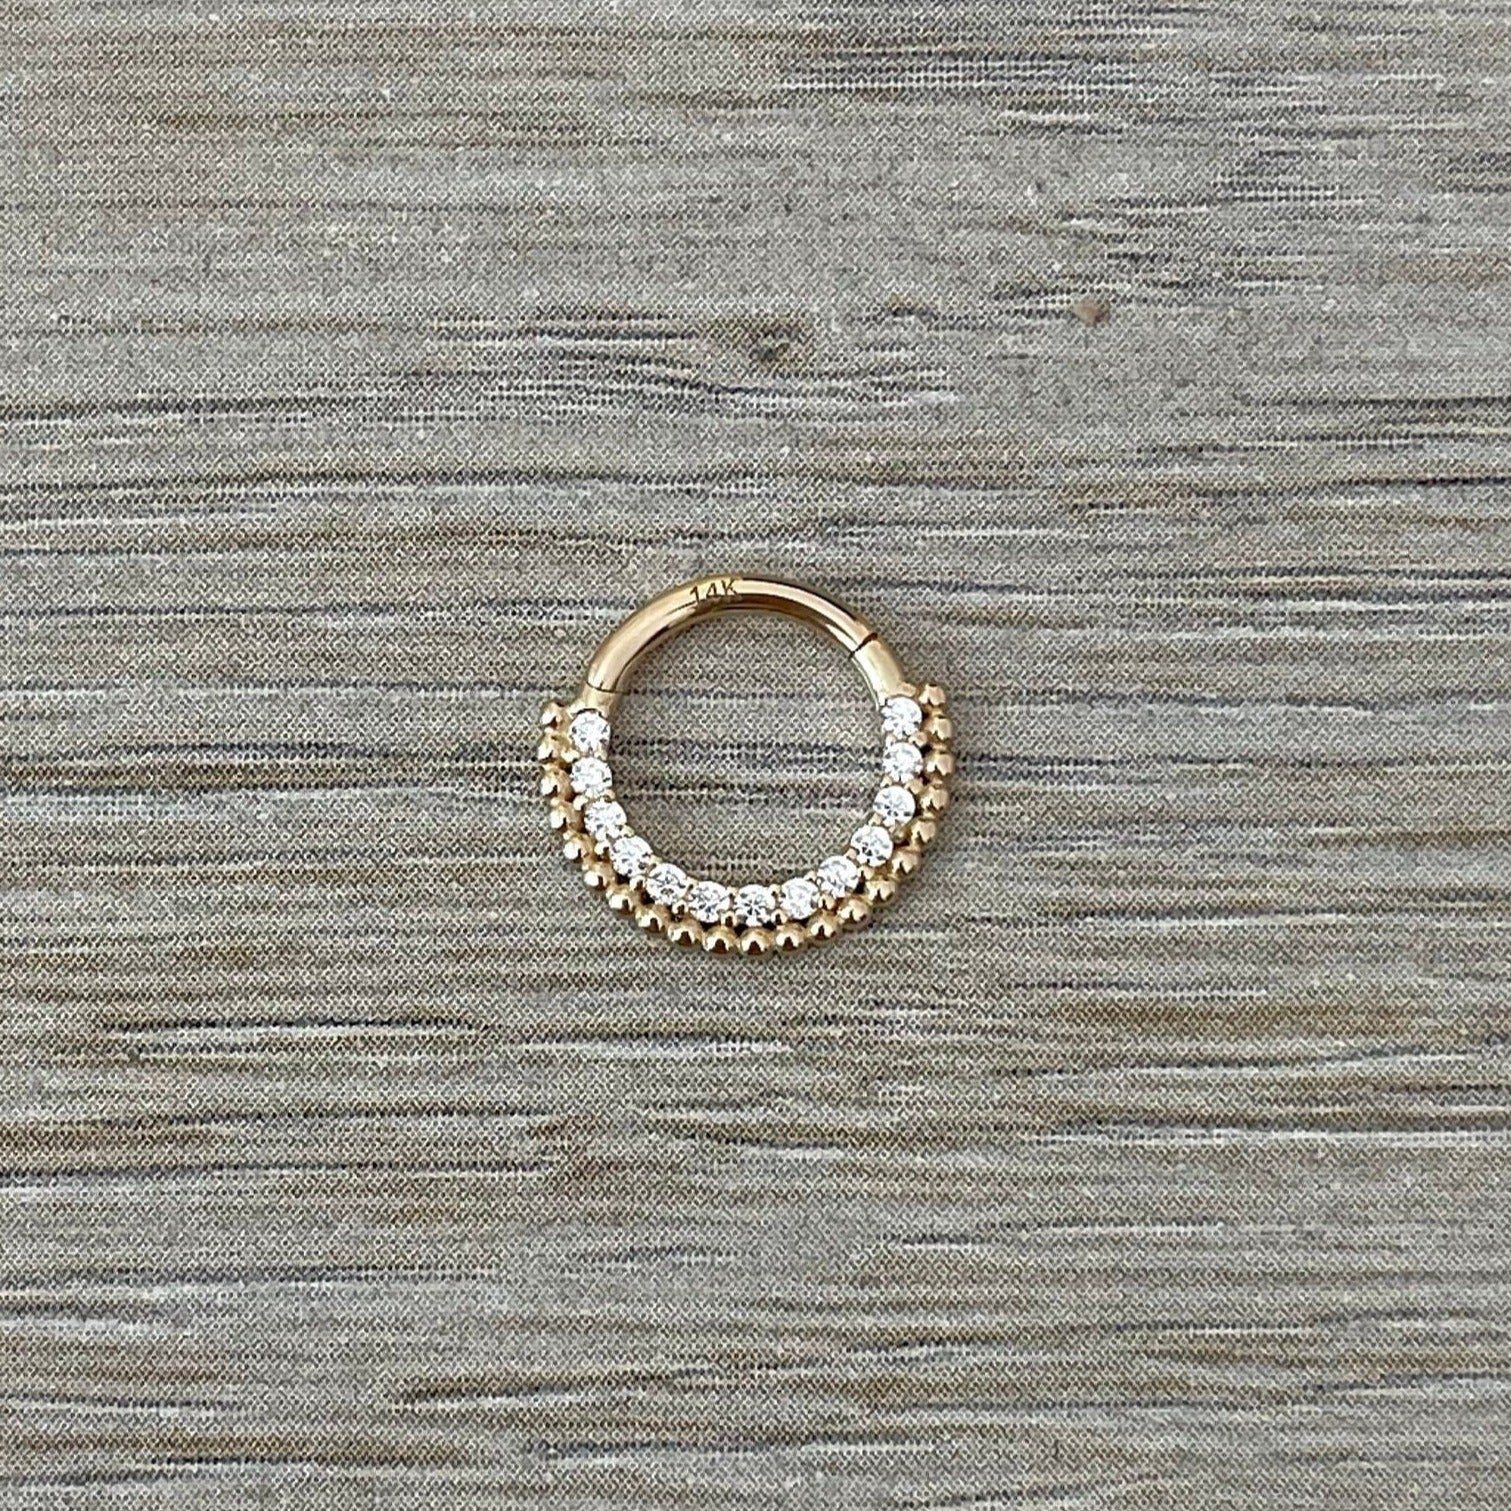 CZ Solid Gold Septum Piercing (16G | 8mm | 14k Solid Gold | White or Yellow Gold)